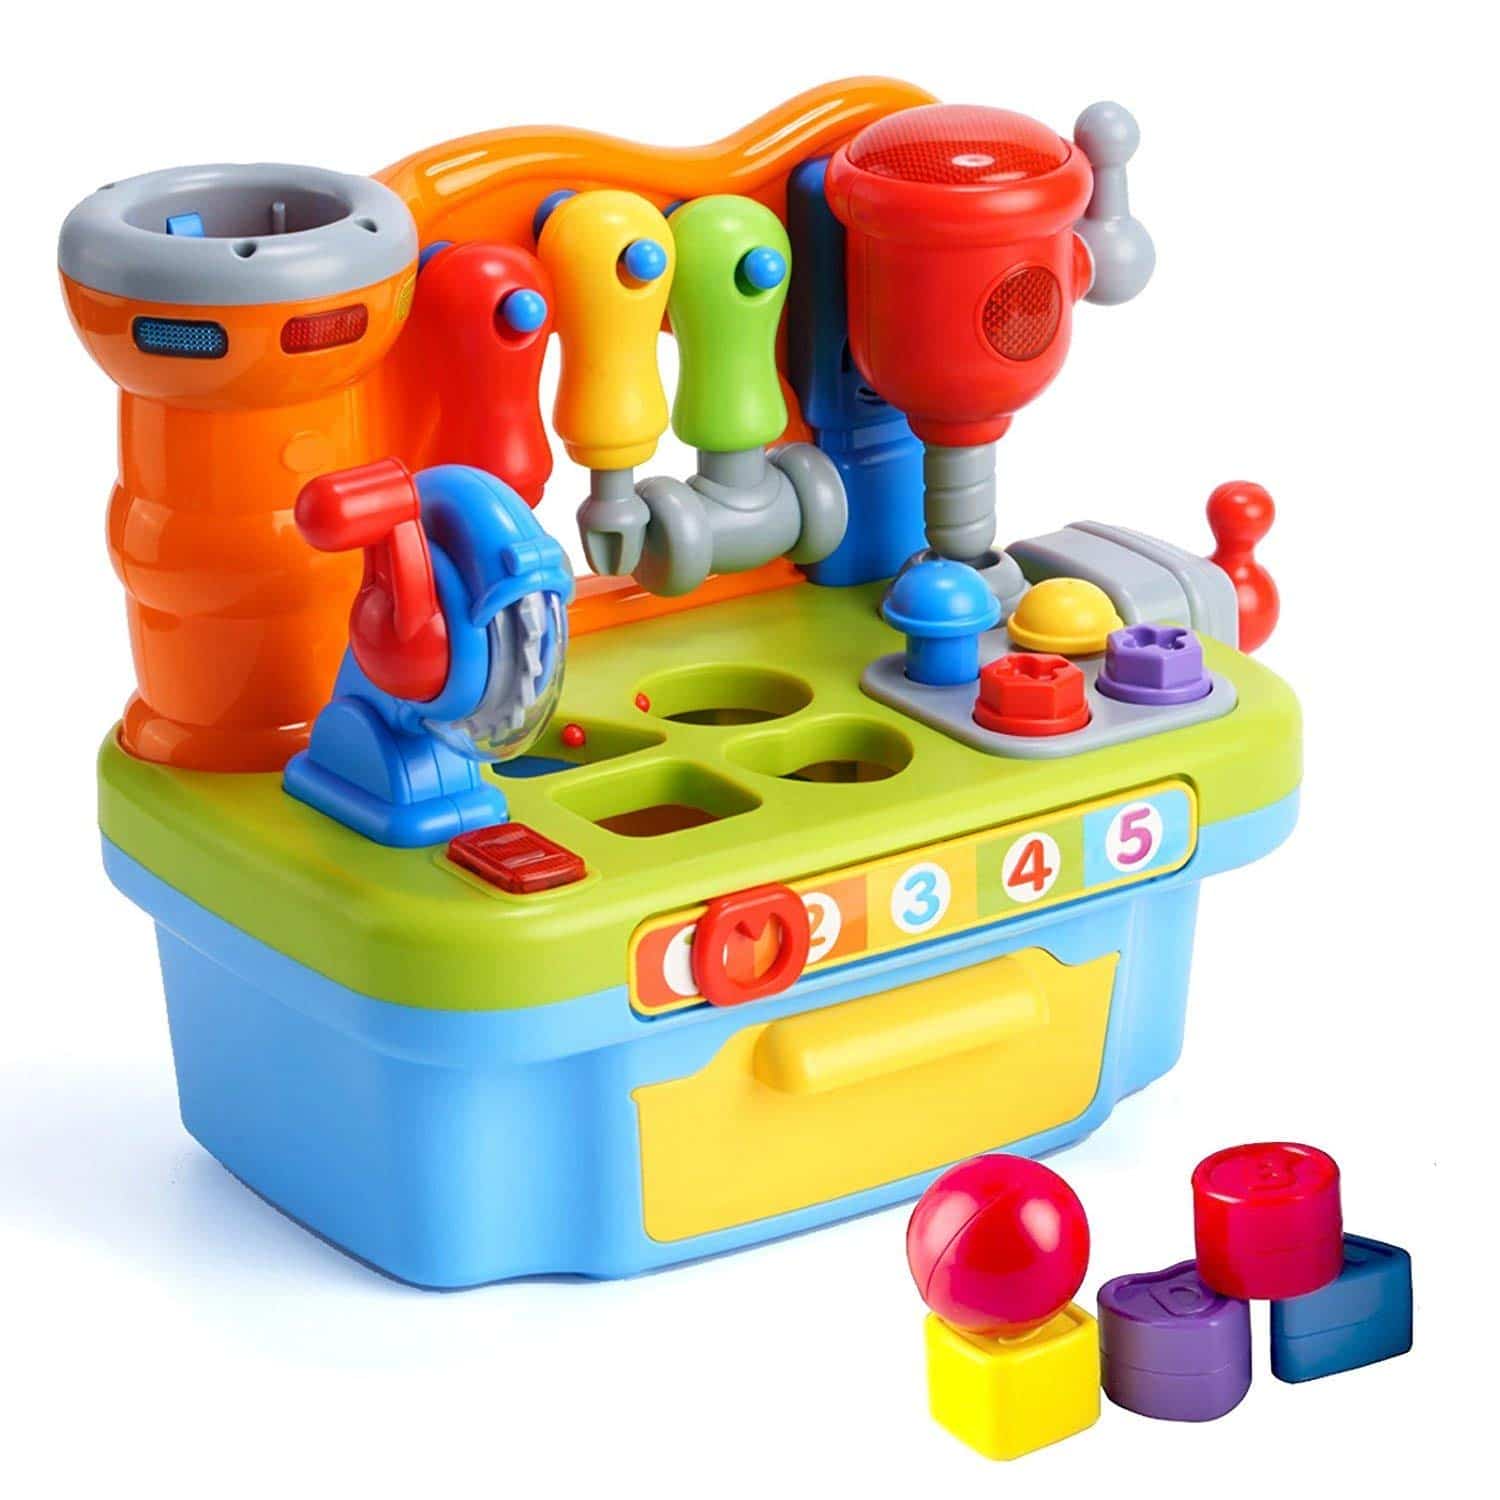 toy tool sets for toddlers